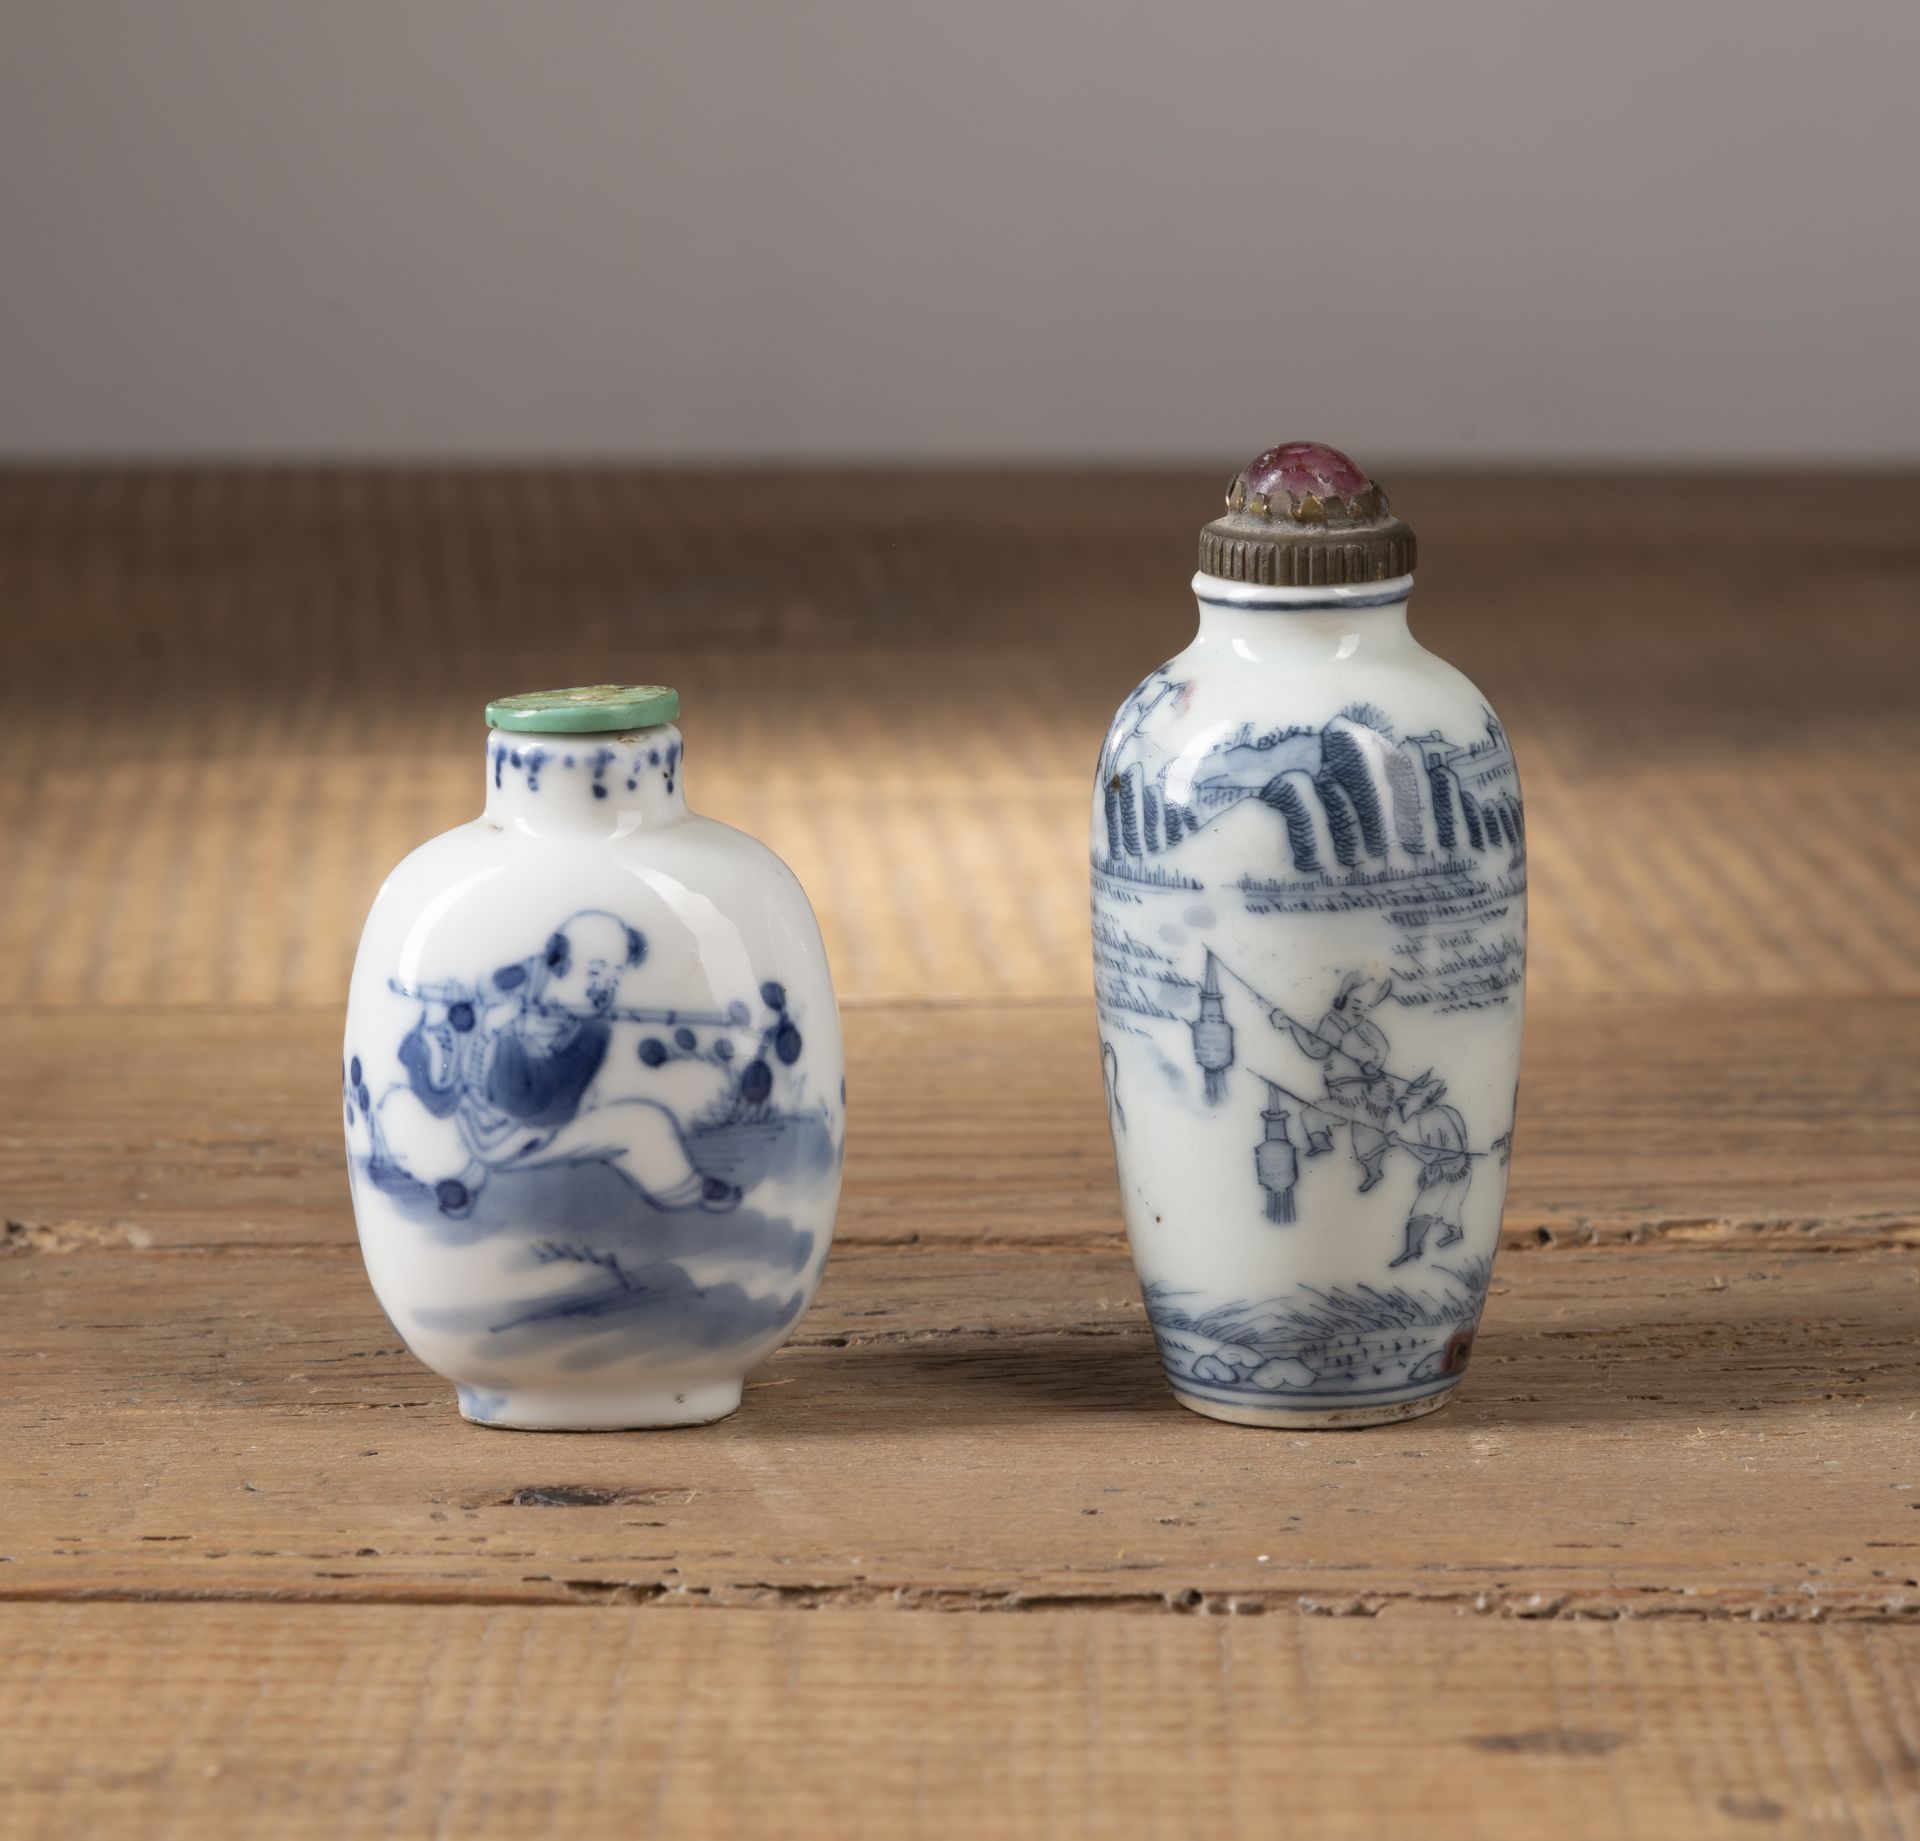 TWO BLUE AND WHITE PORCELAIN SNUFF BOTTLES DEPICTING THE WEDDING OF ZHONG KUI'S SISTER AND A MEETIN - Image 4 of 4